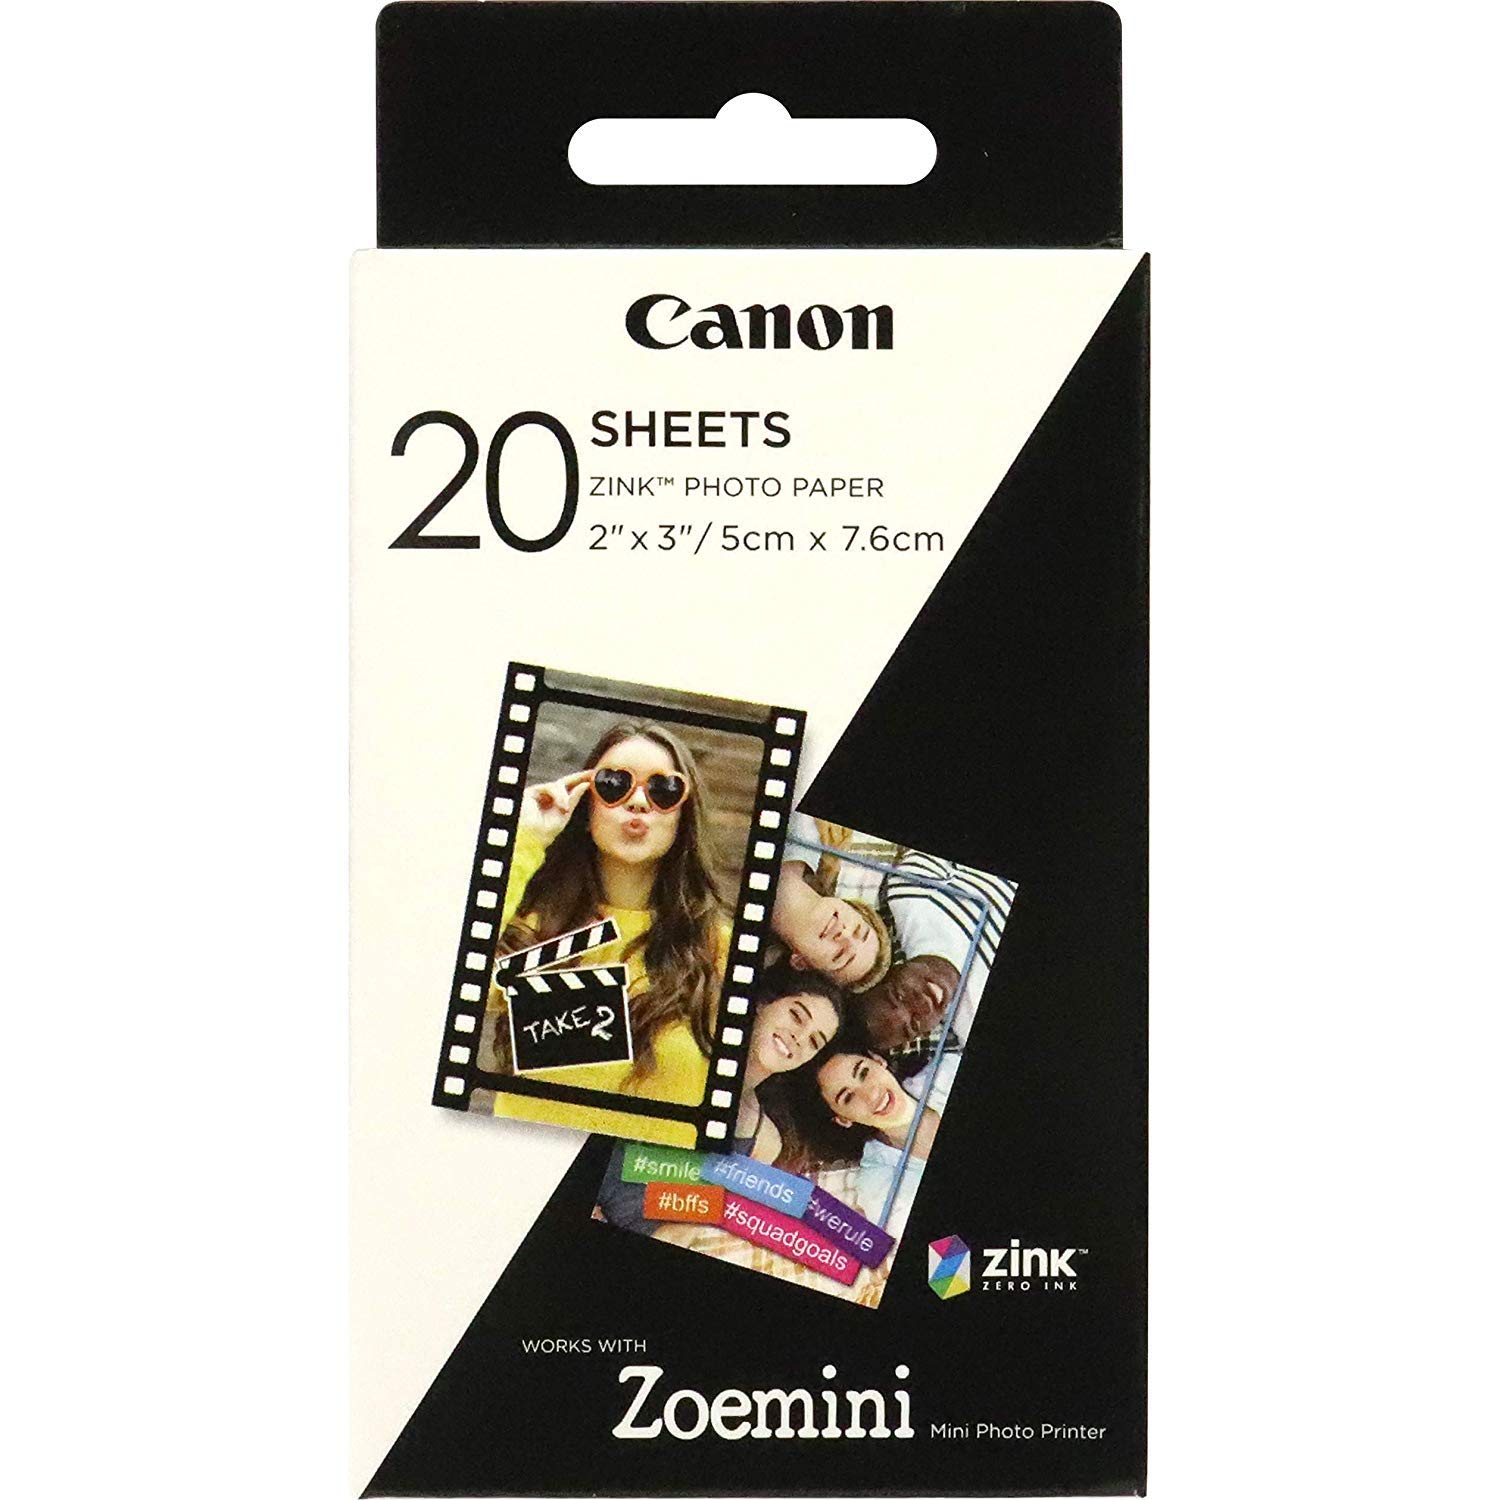 Canon ZP-2030 20 SHEETS EXP HB